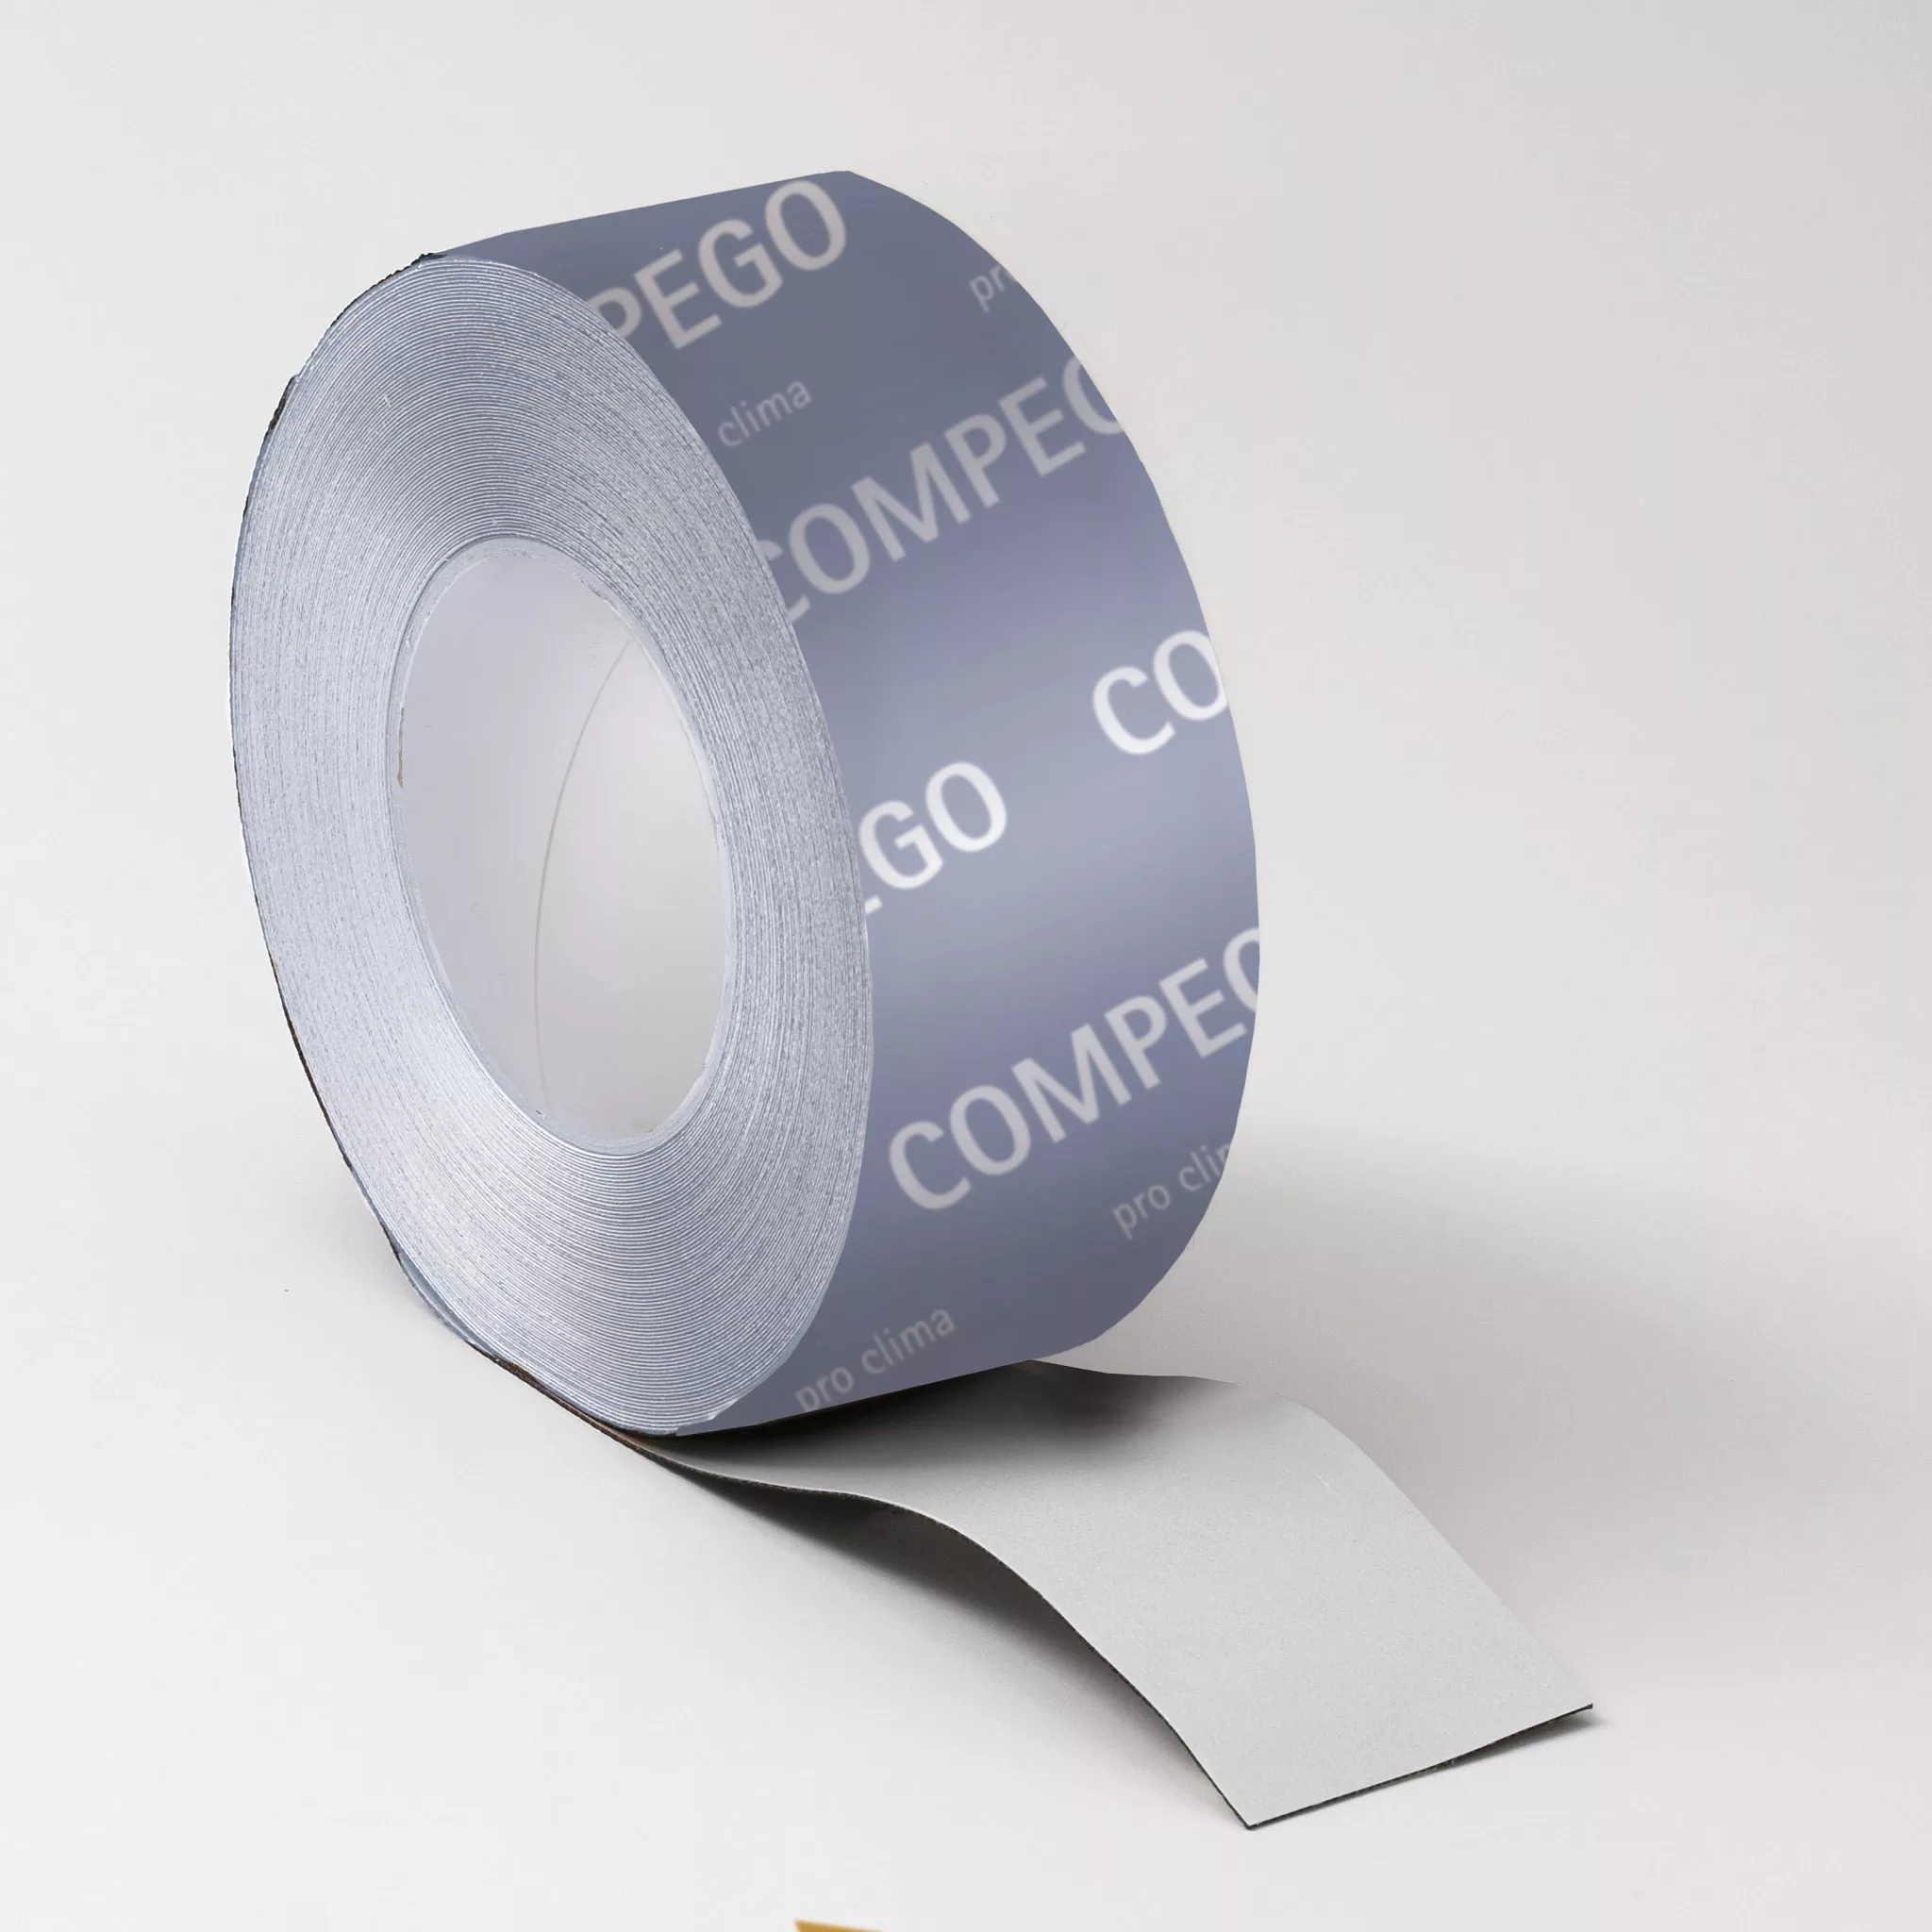 Pro Clima Compego air tightness tape